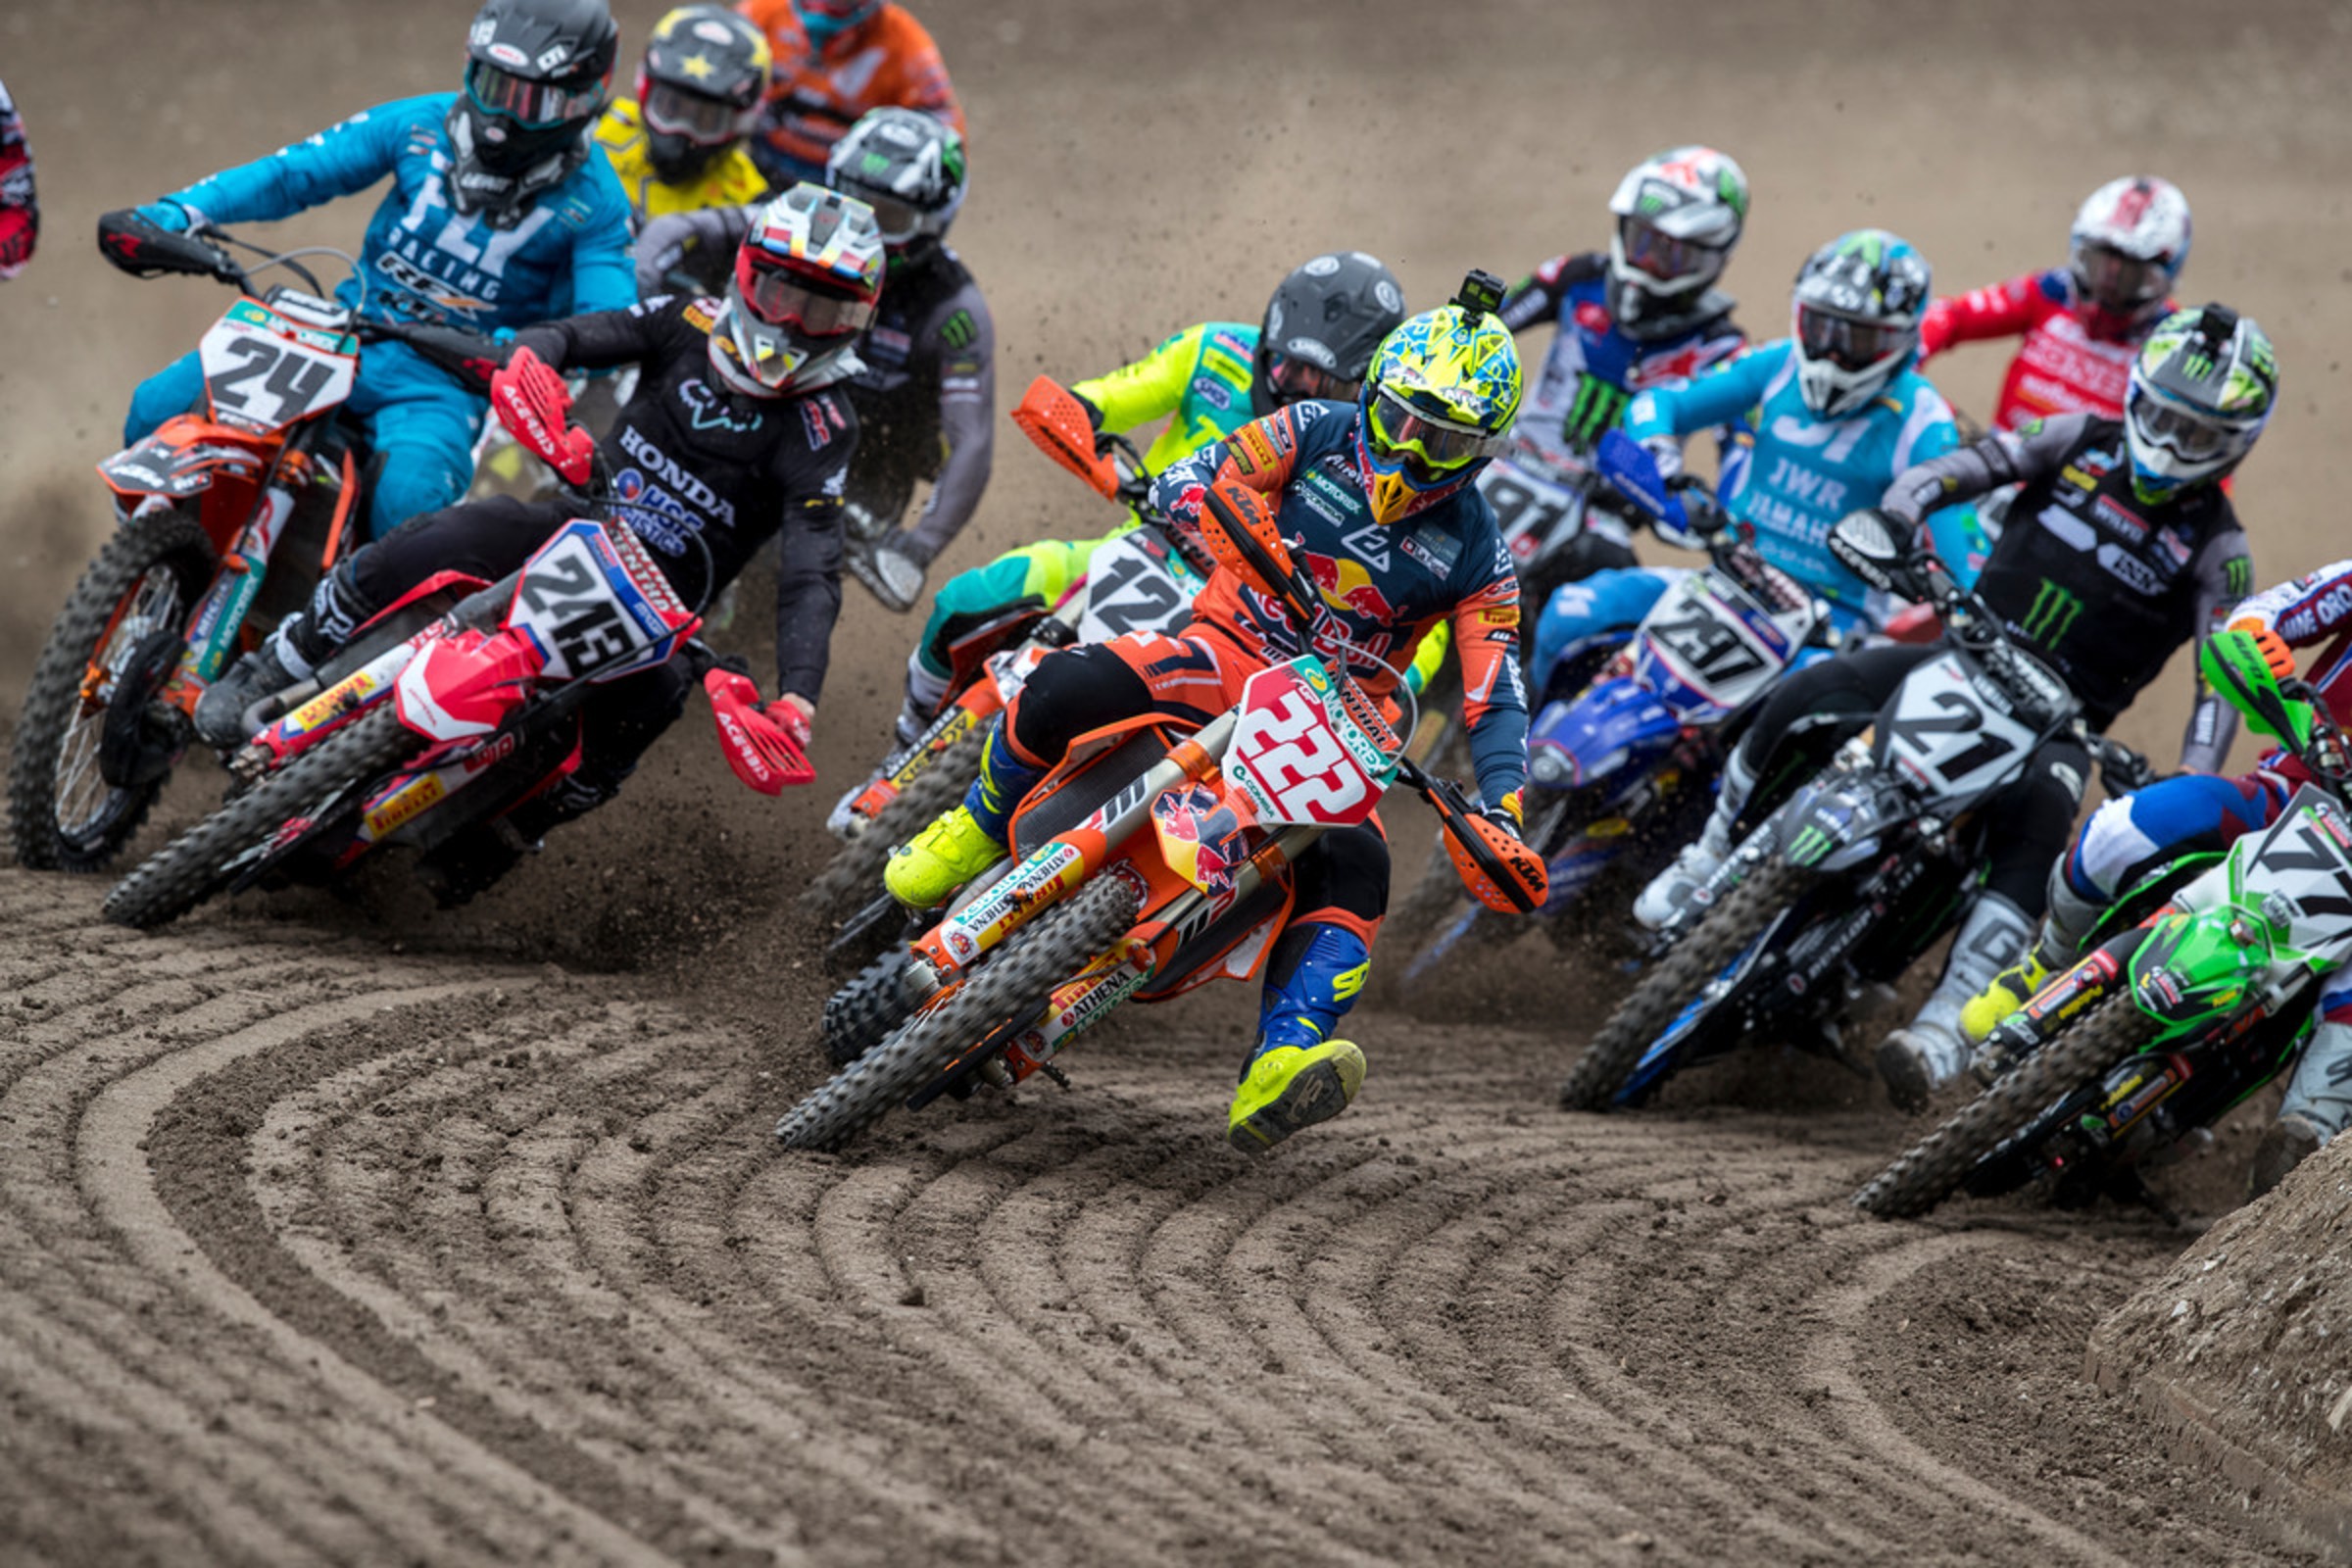 How to Watch 2019 MXGP of Lombardia